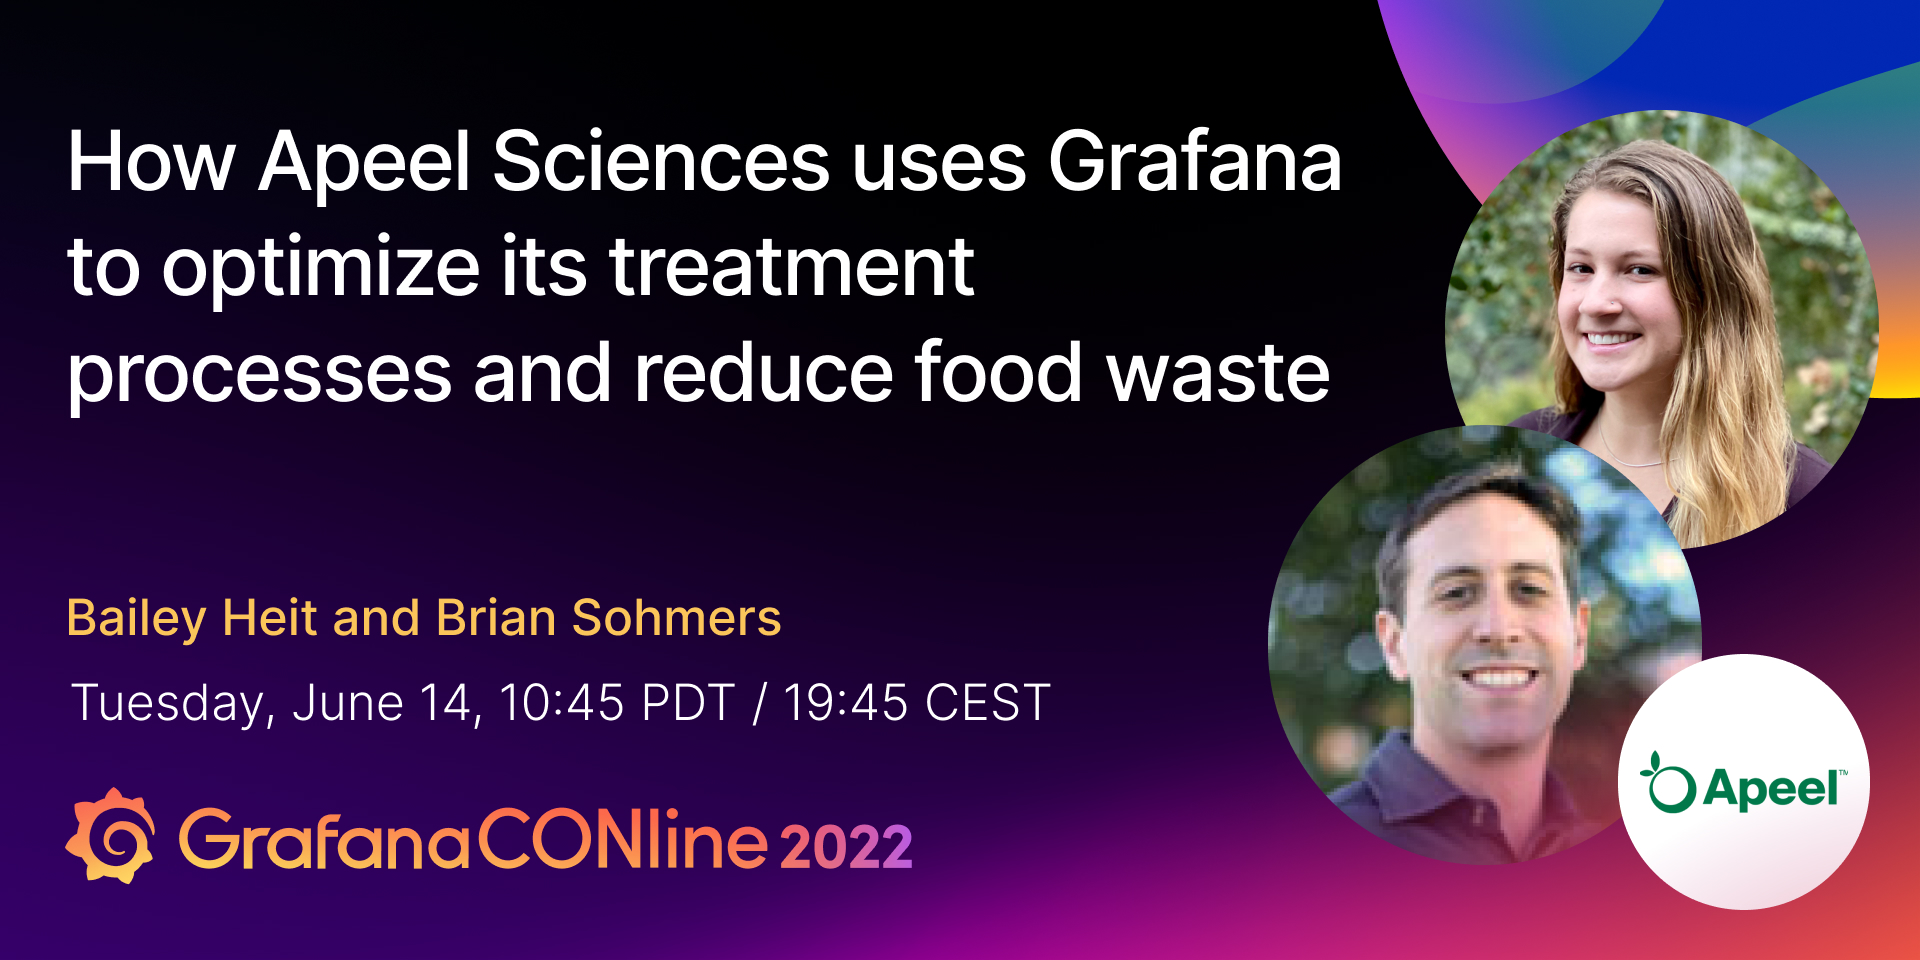 How Apeel Sciences uses Grafana to optimize its treatment processes and reduce food waste